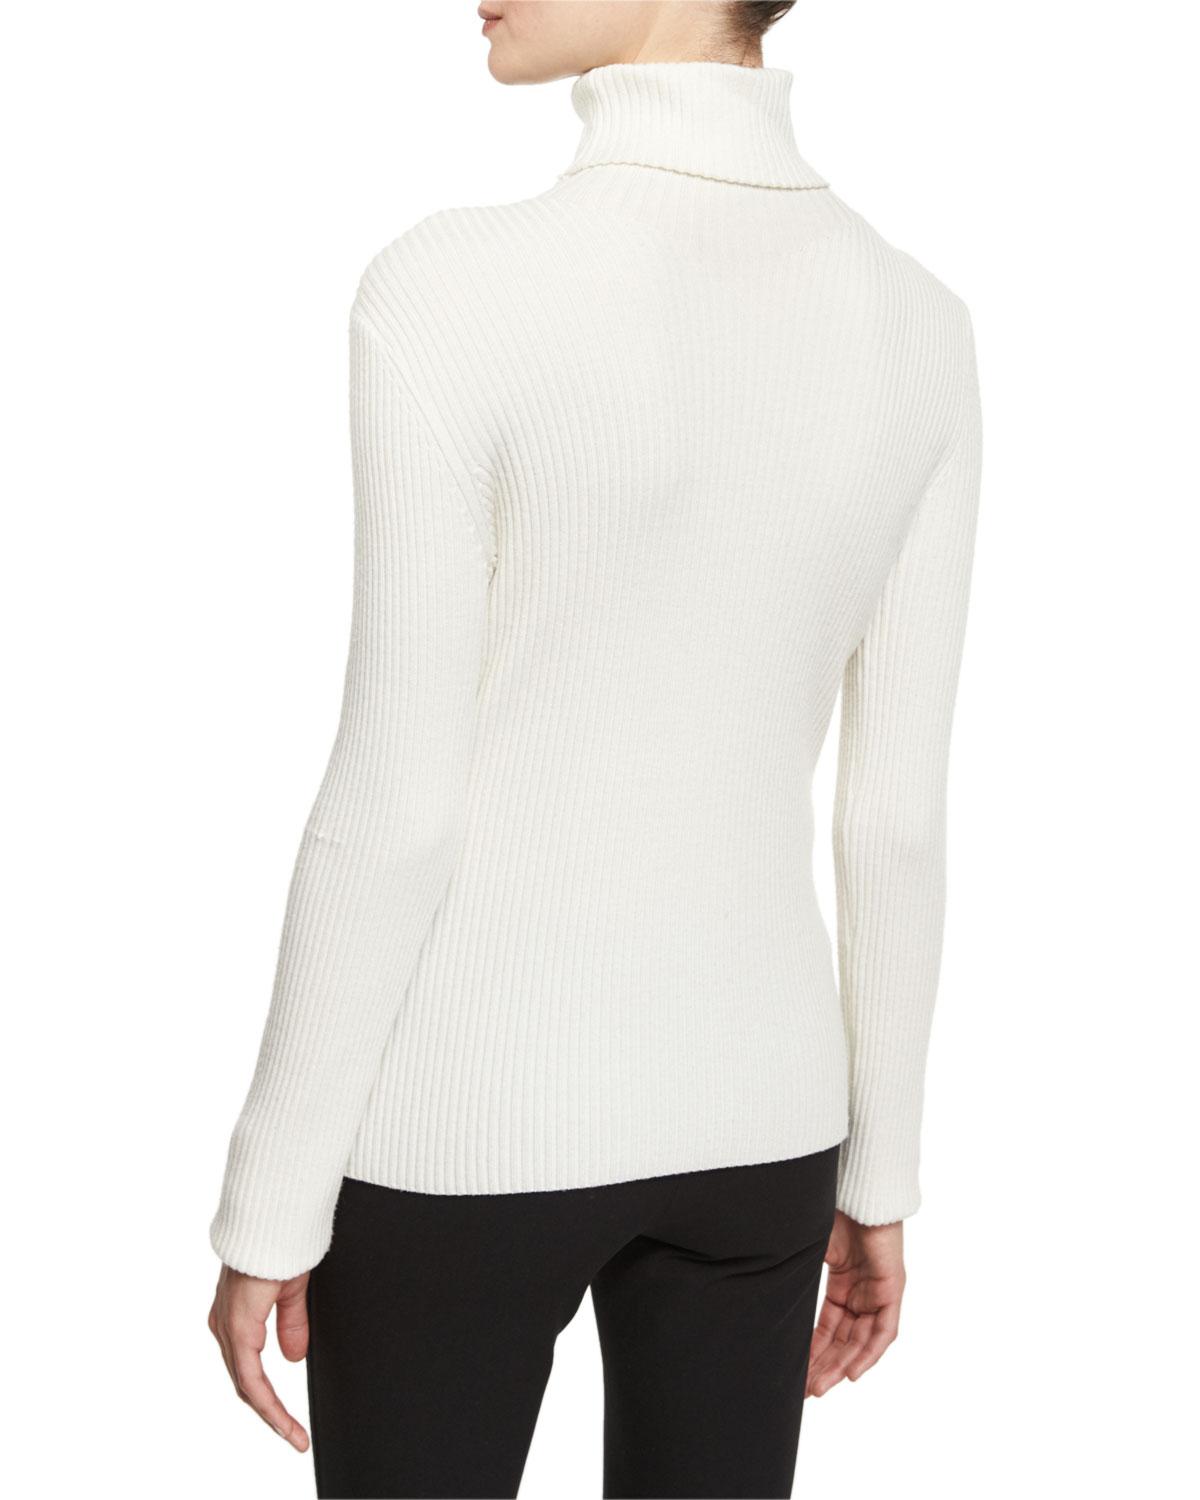 Lyst - 3.1 Phillip Lim Long-sleeve Ribbed Turtleneck Sweater in White